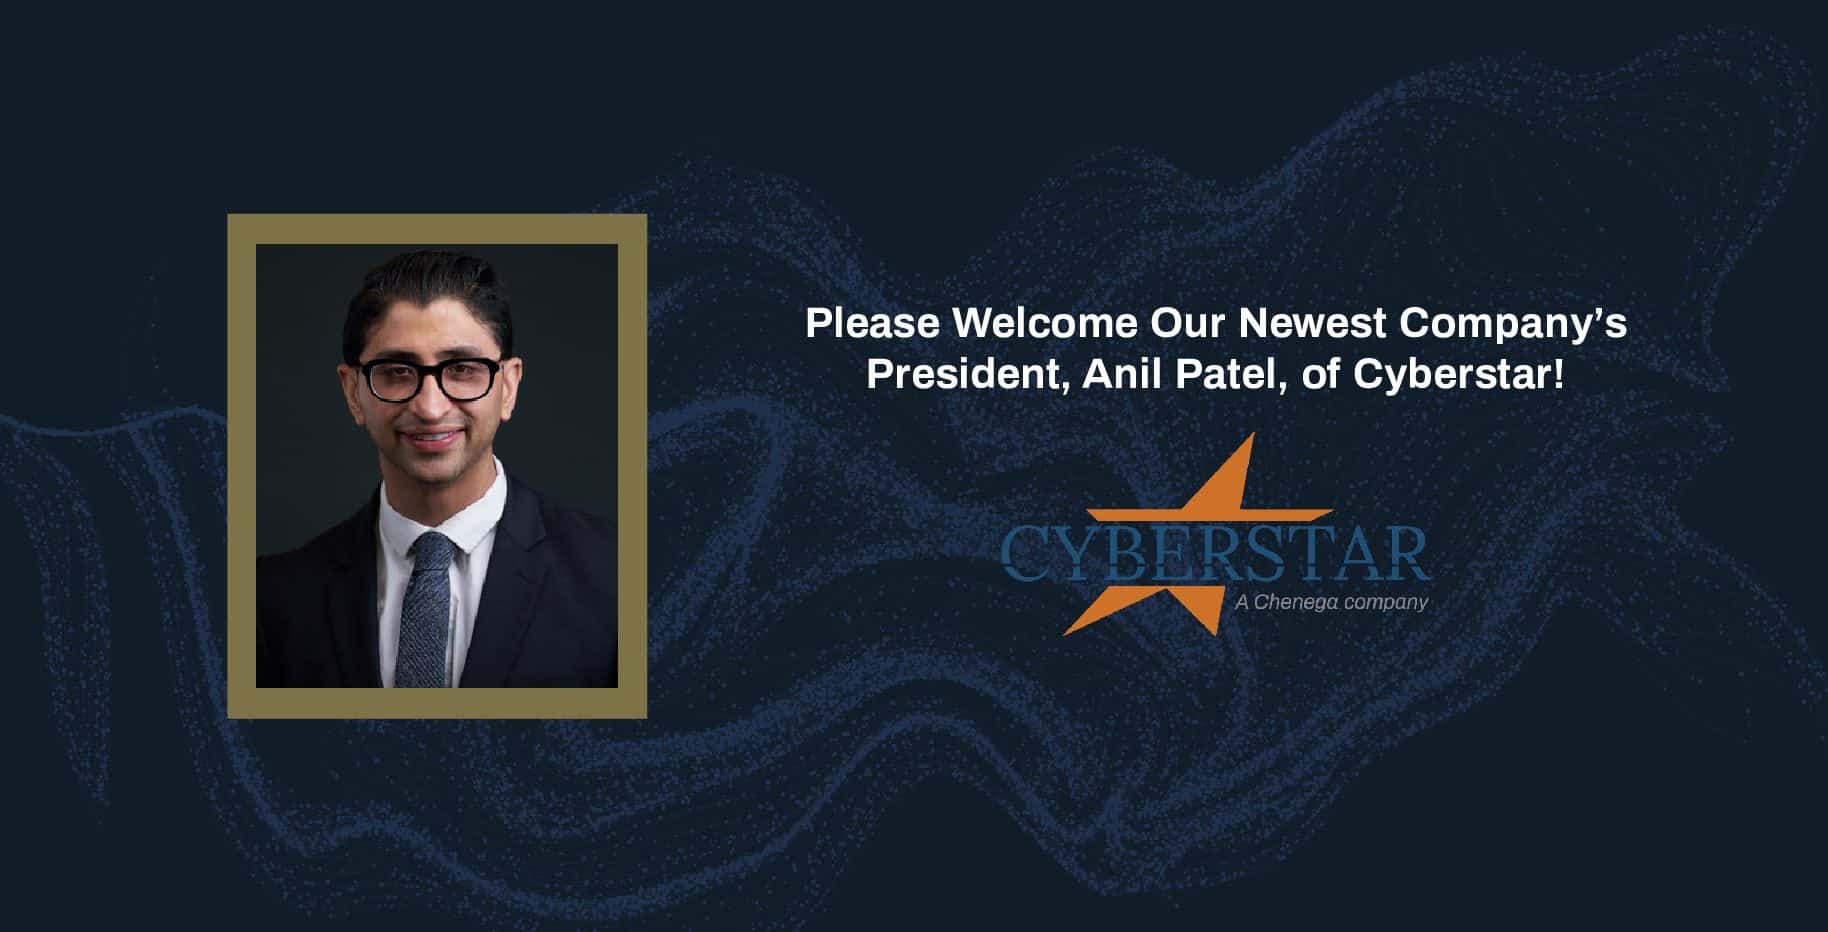 Chenega MIOS Welcomes Its Newest Company President, Anil Patel, Of Cyberstar